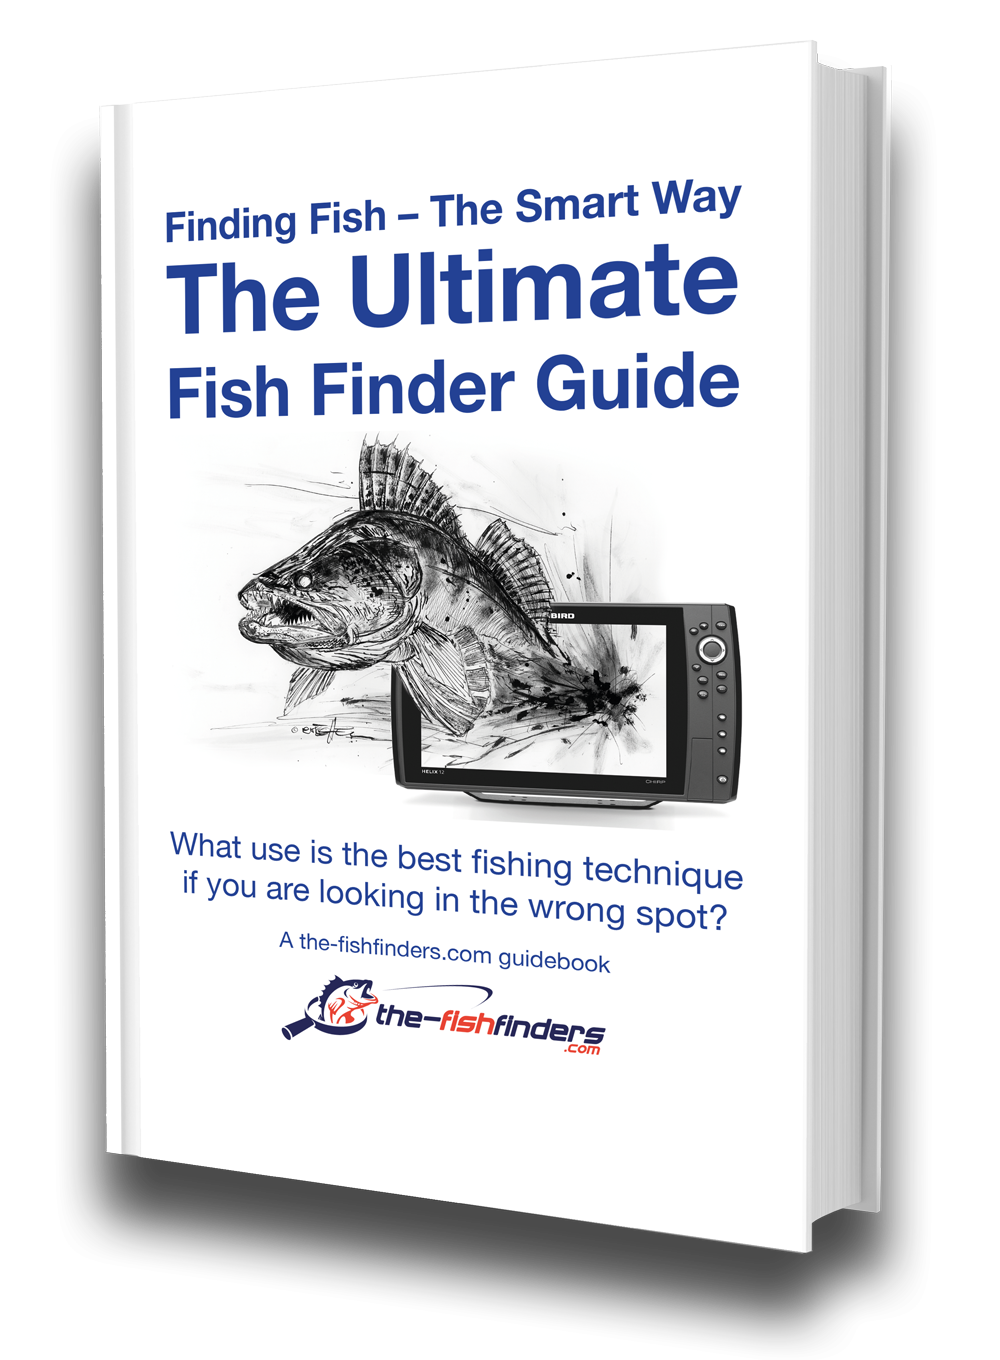 https://www.the-fishfinders.com/wp-content/uploads/2017/08/the-ultimate-fish-finder-guide-3D-cover.png